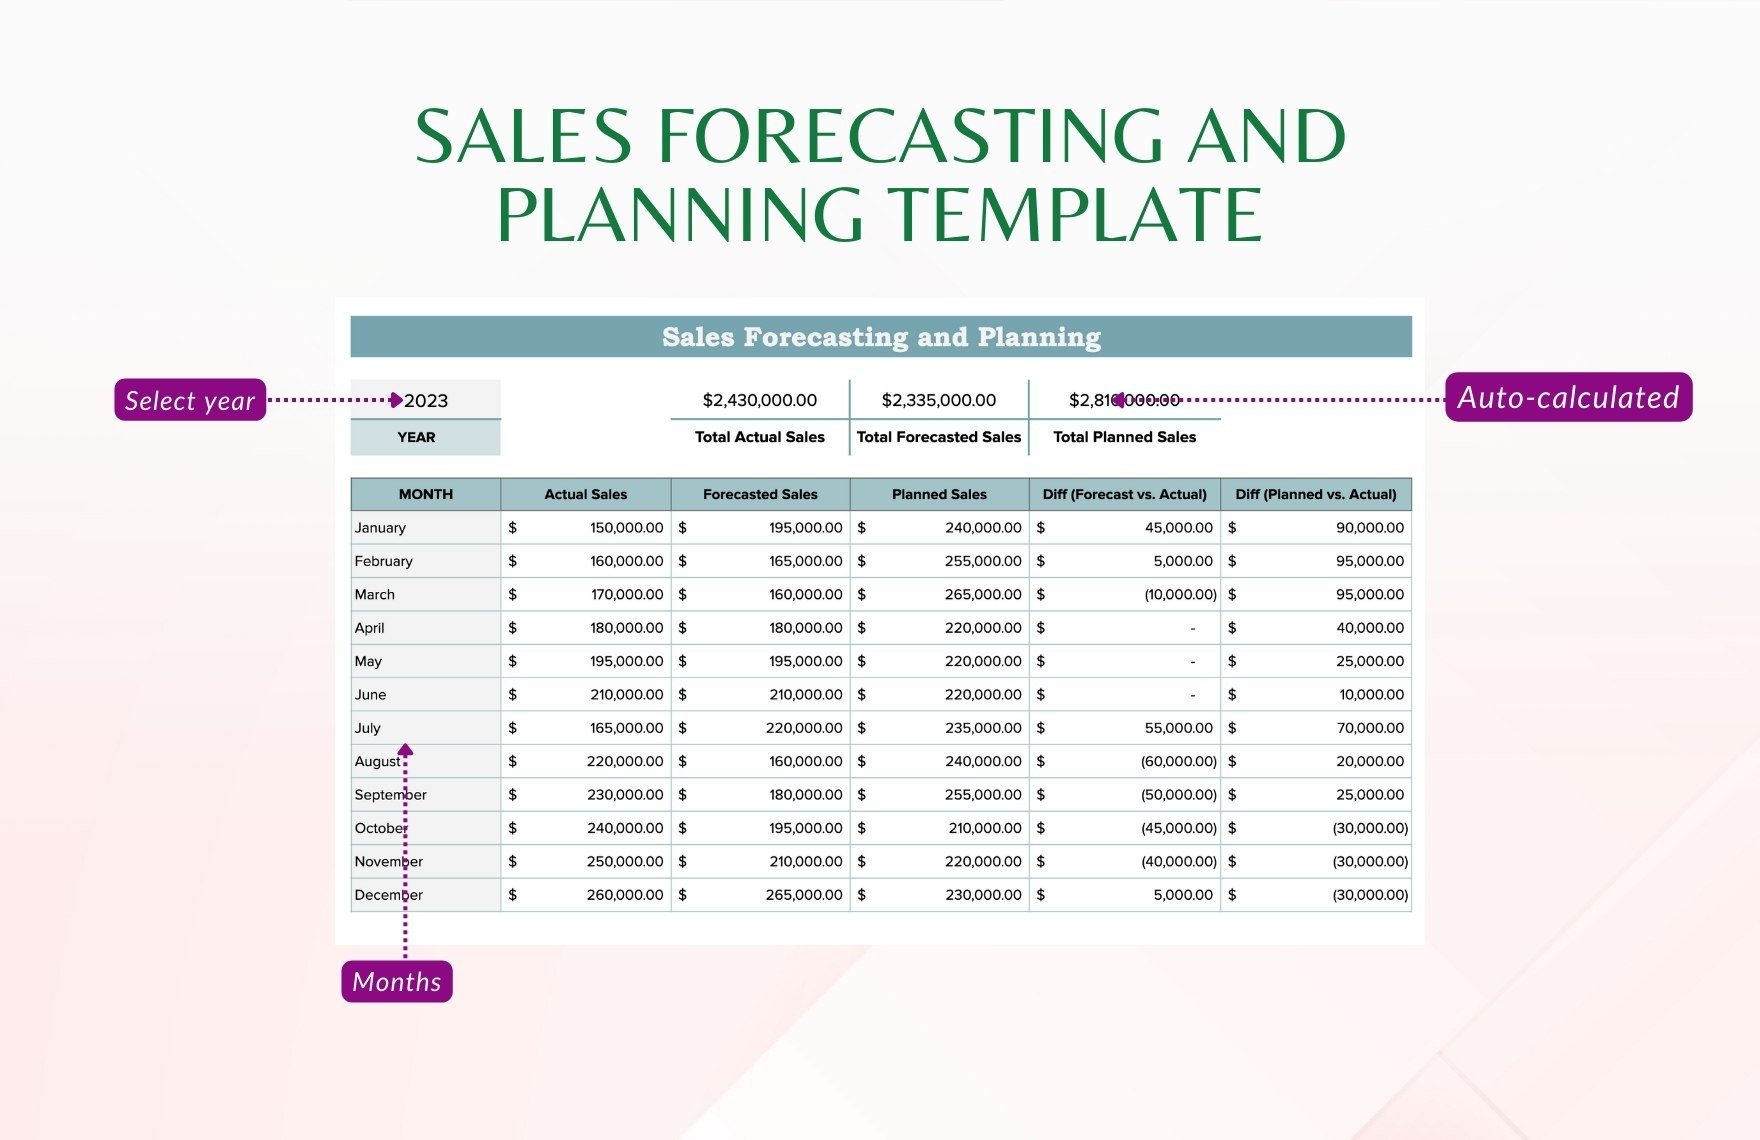 Sales Forecasting and Planning Template